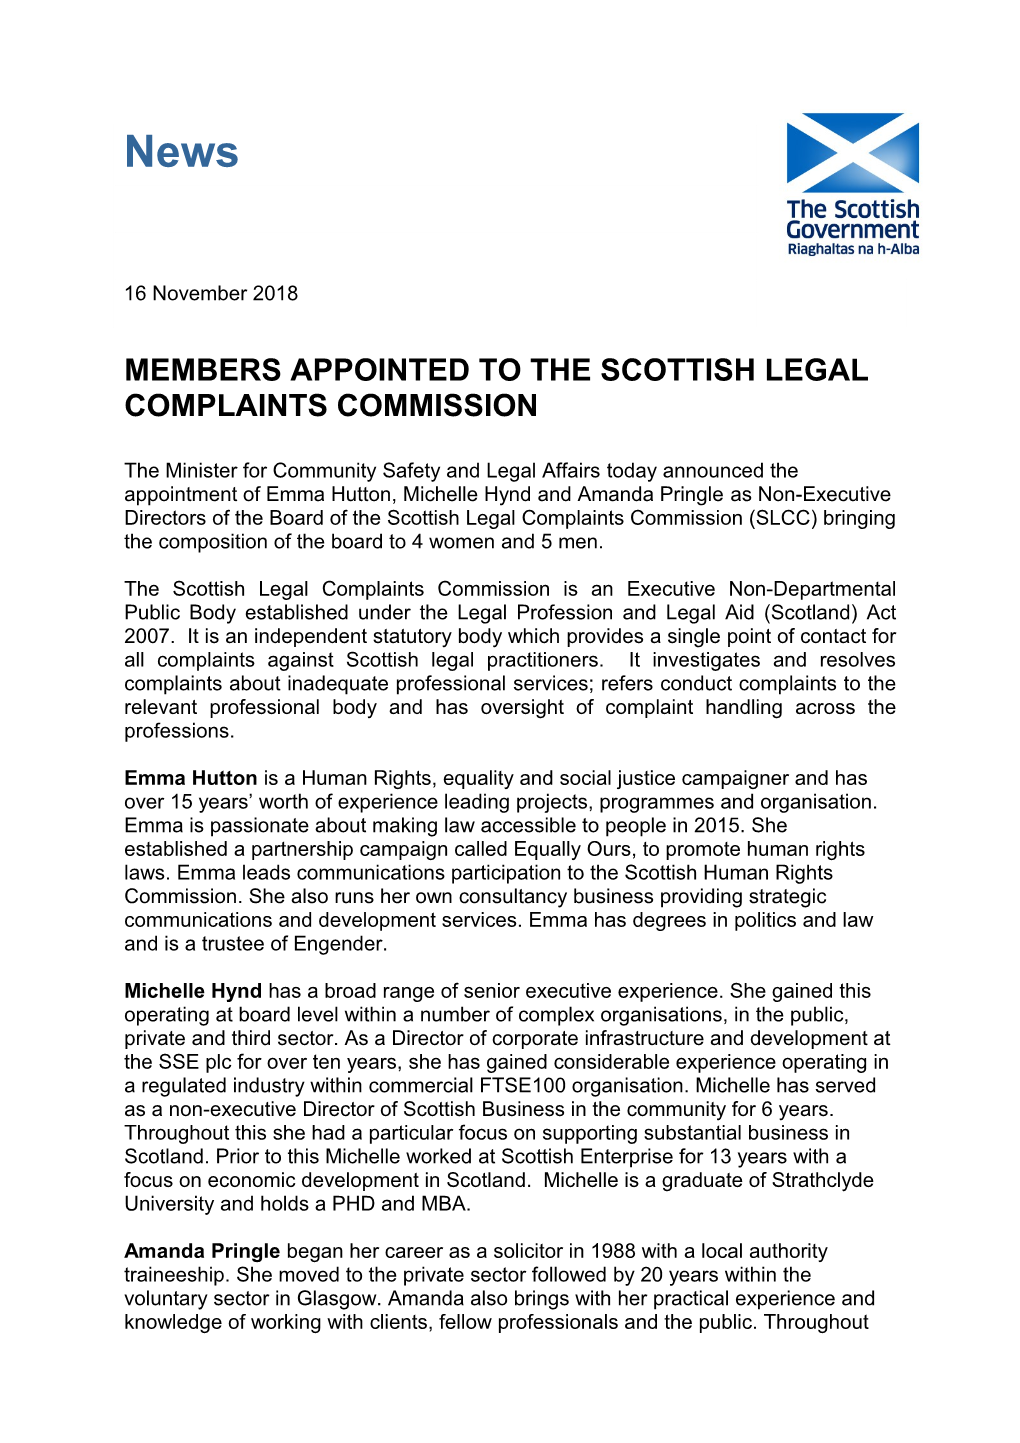 Members Appointed to the Scottish Legal Complaints Commission